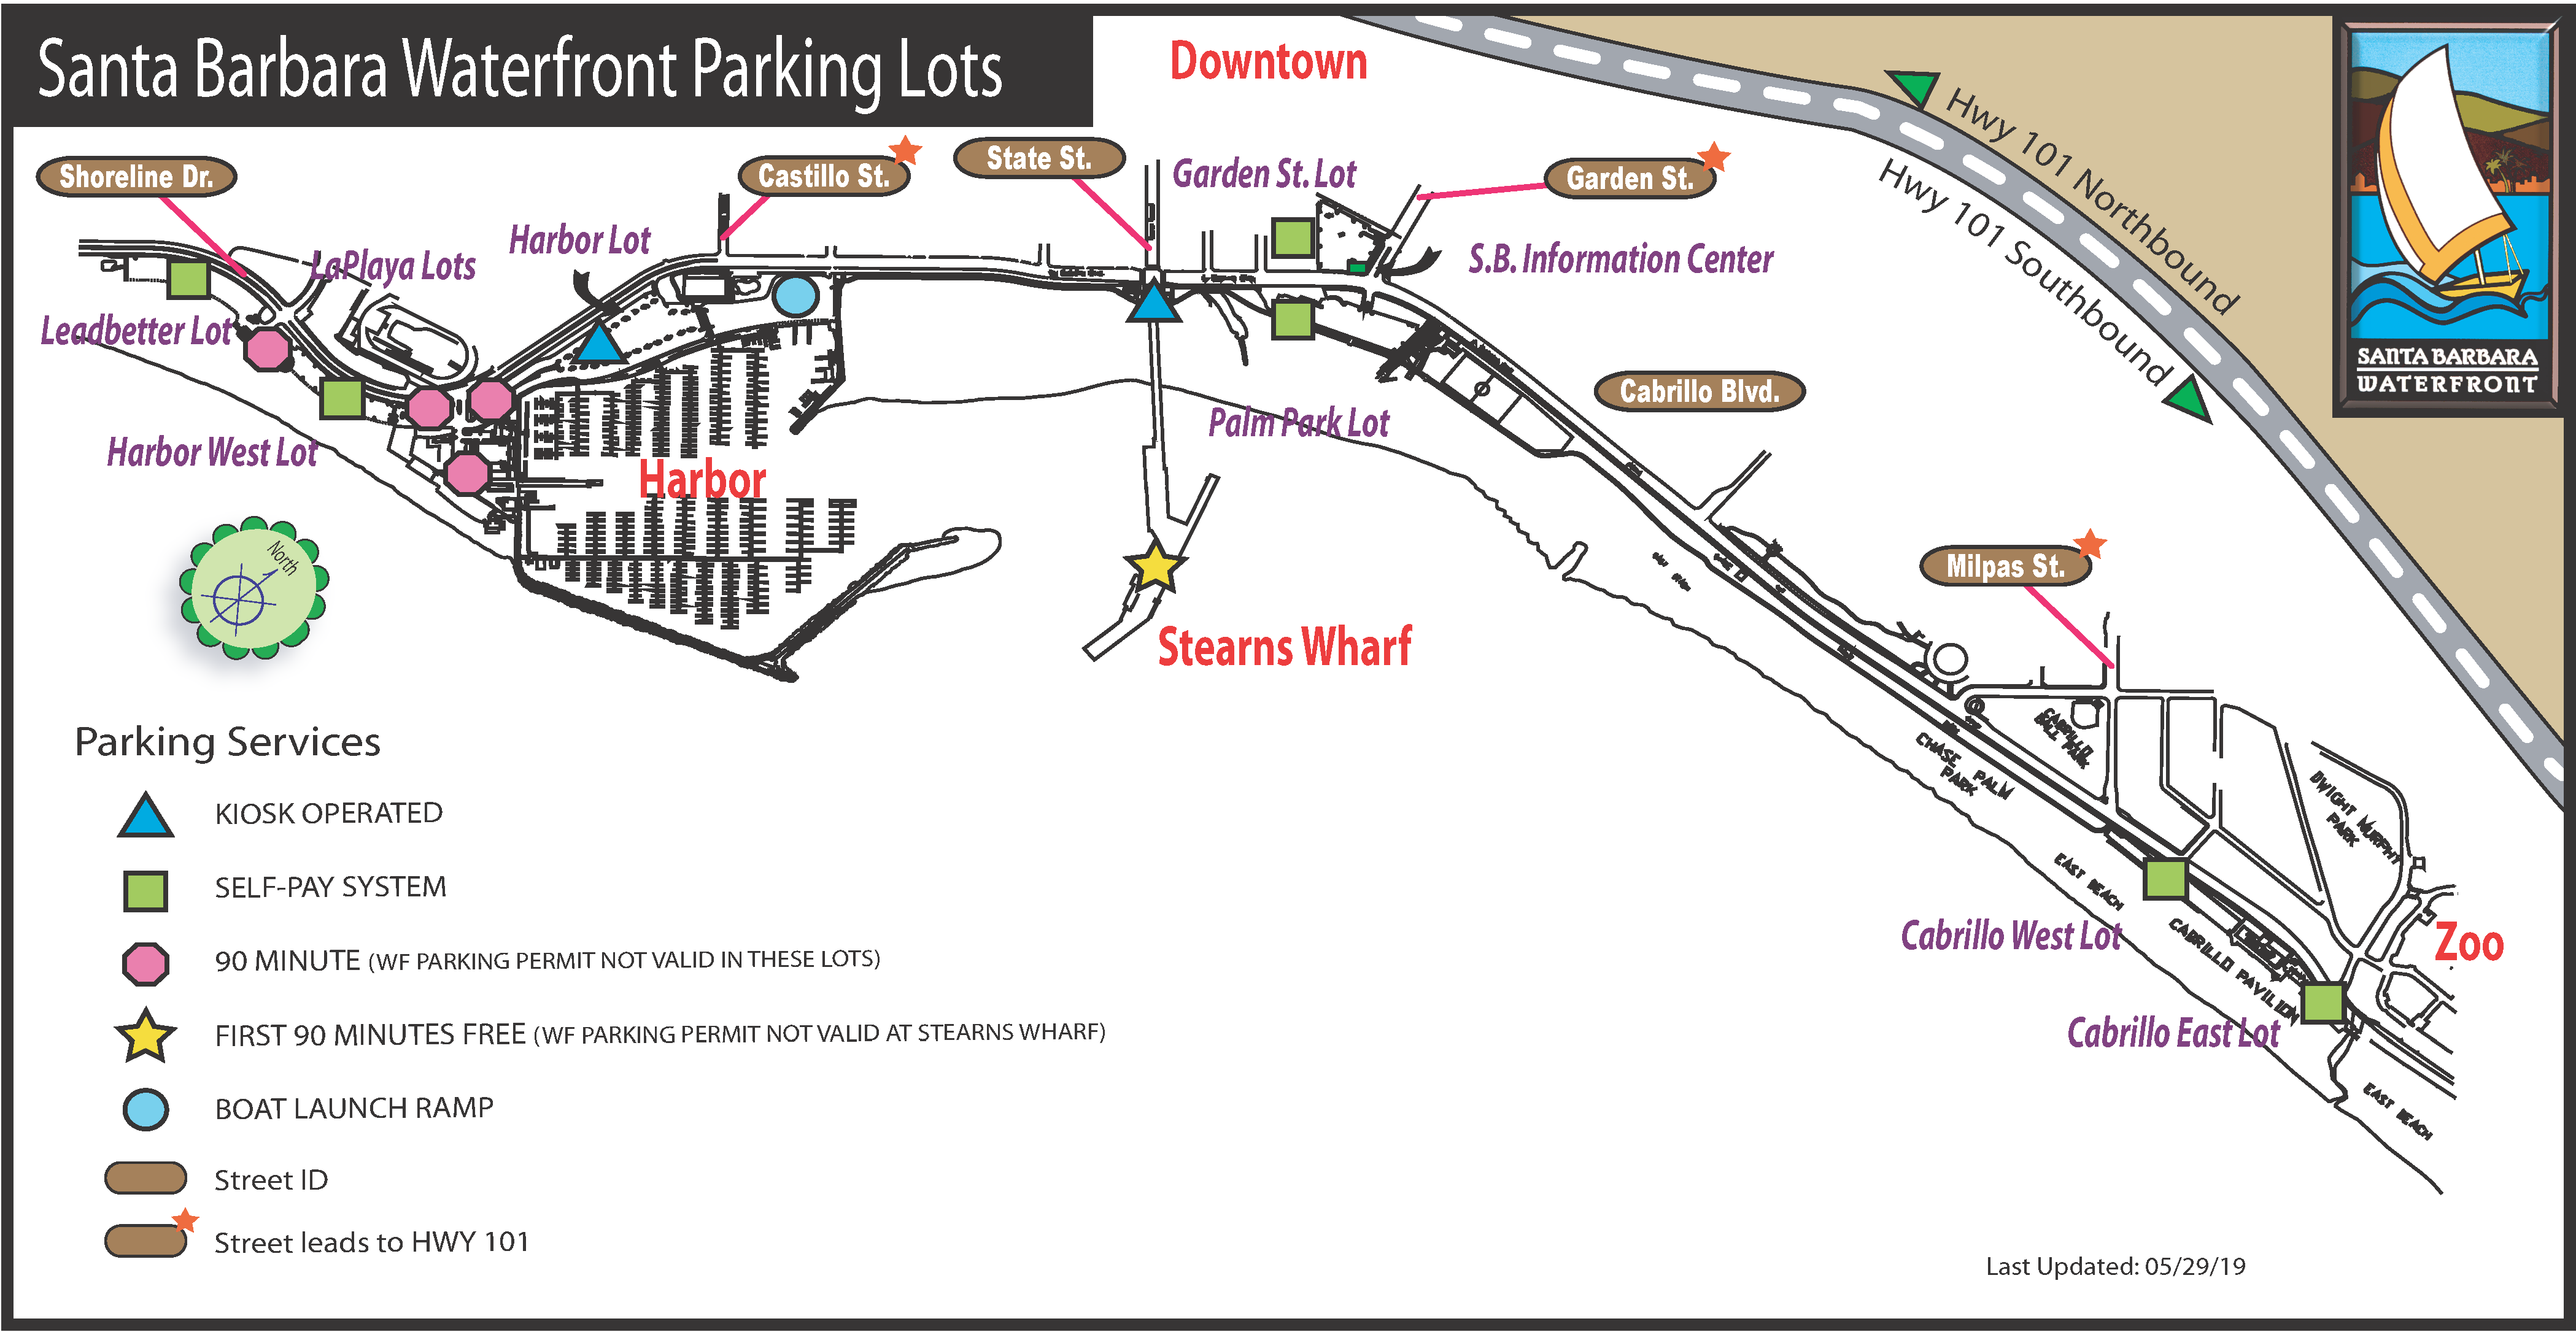 Waterfront Parking Lots Map